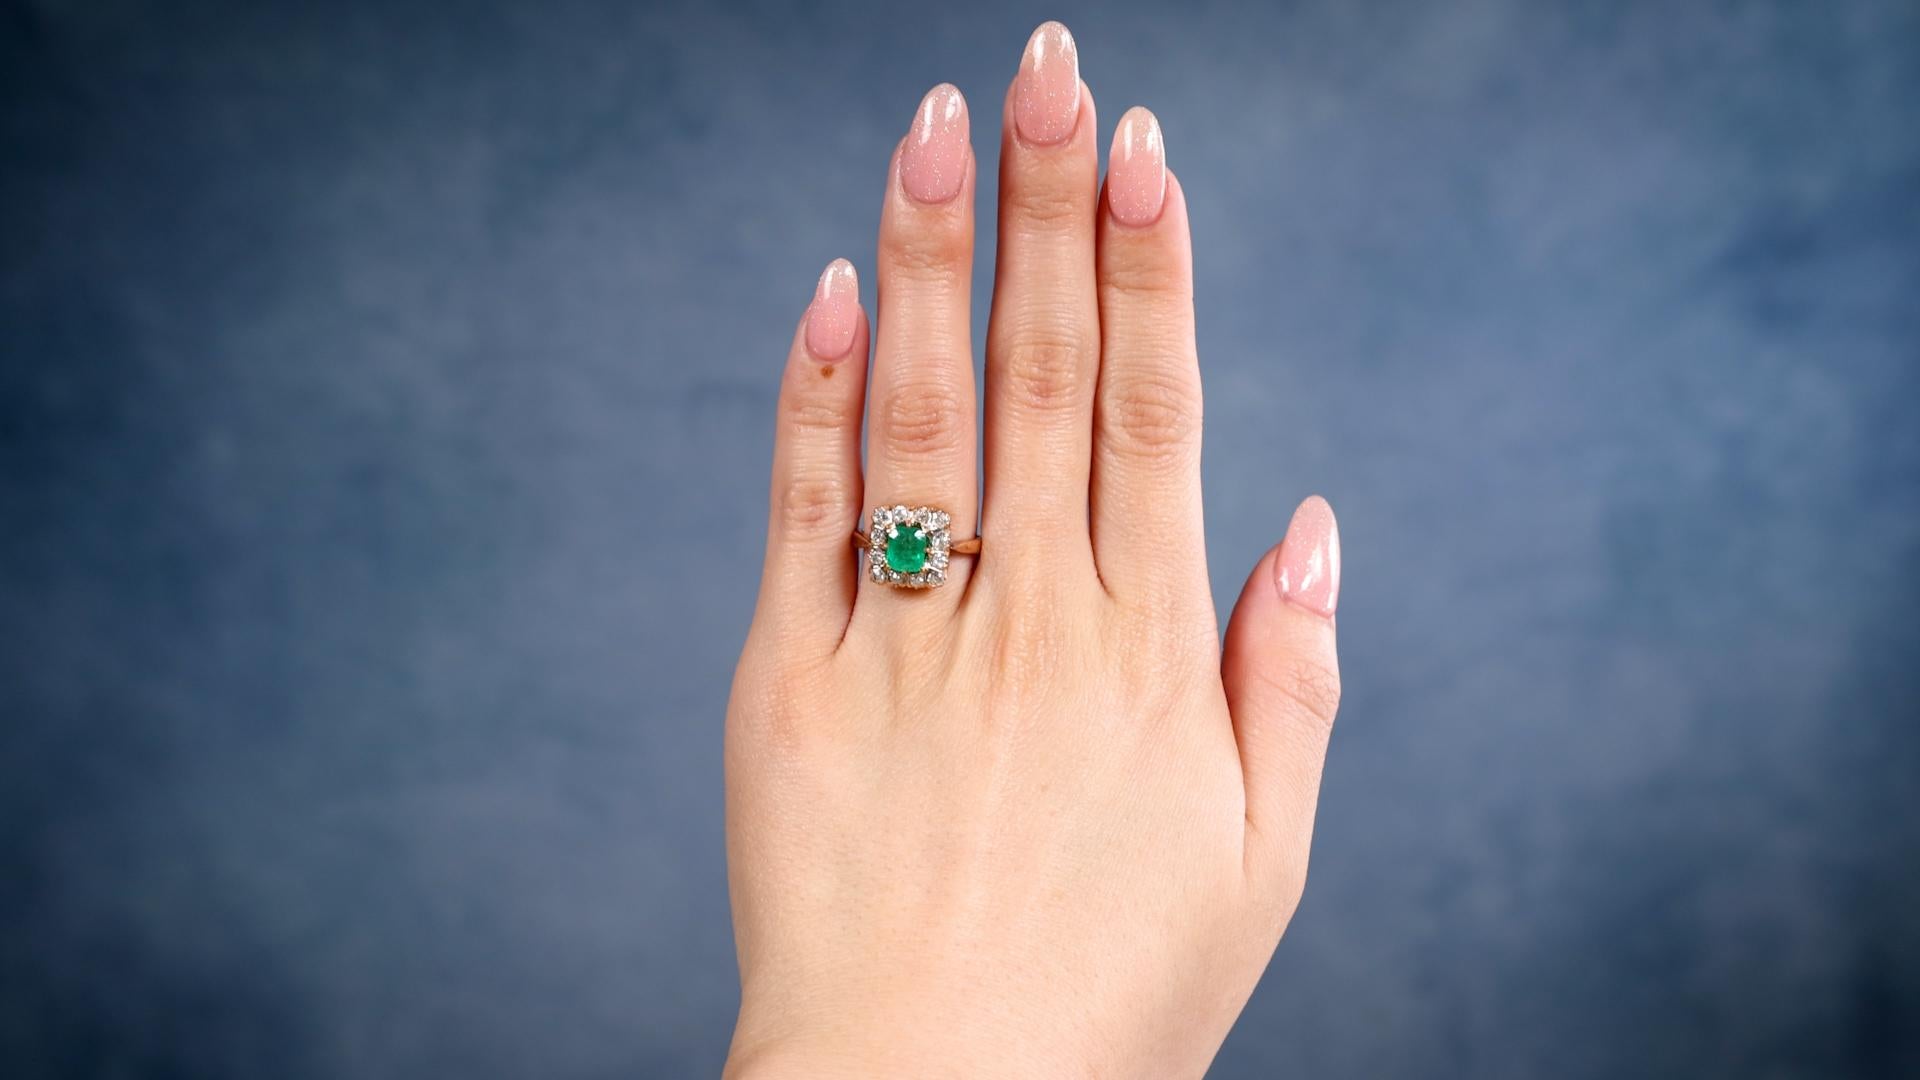 One Victorian Revival Square Emerald Diamond 18k Rose Gold Cluster Ring. Featuring one rectangular step cut emerald weighing approximately 0.60 carat. Accented by 12 transitional and old European cut diamonds with a total weight of approximately